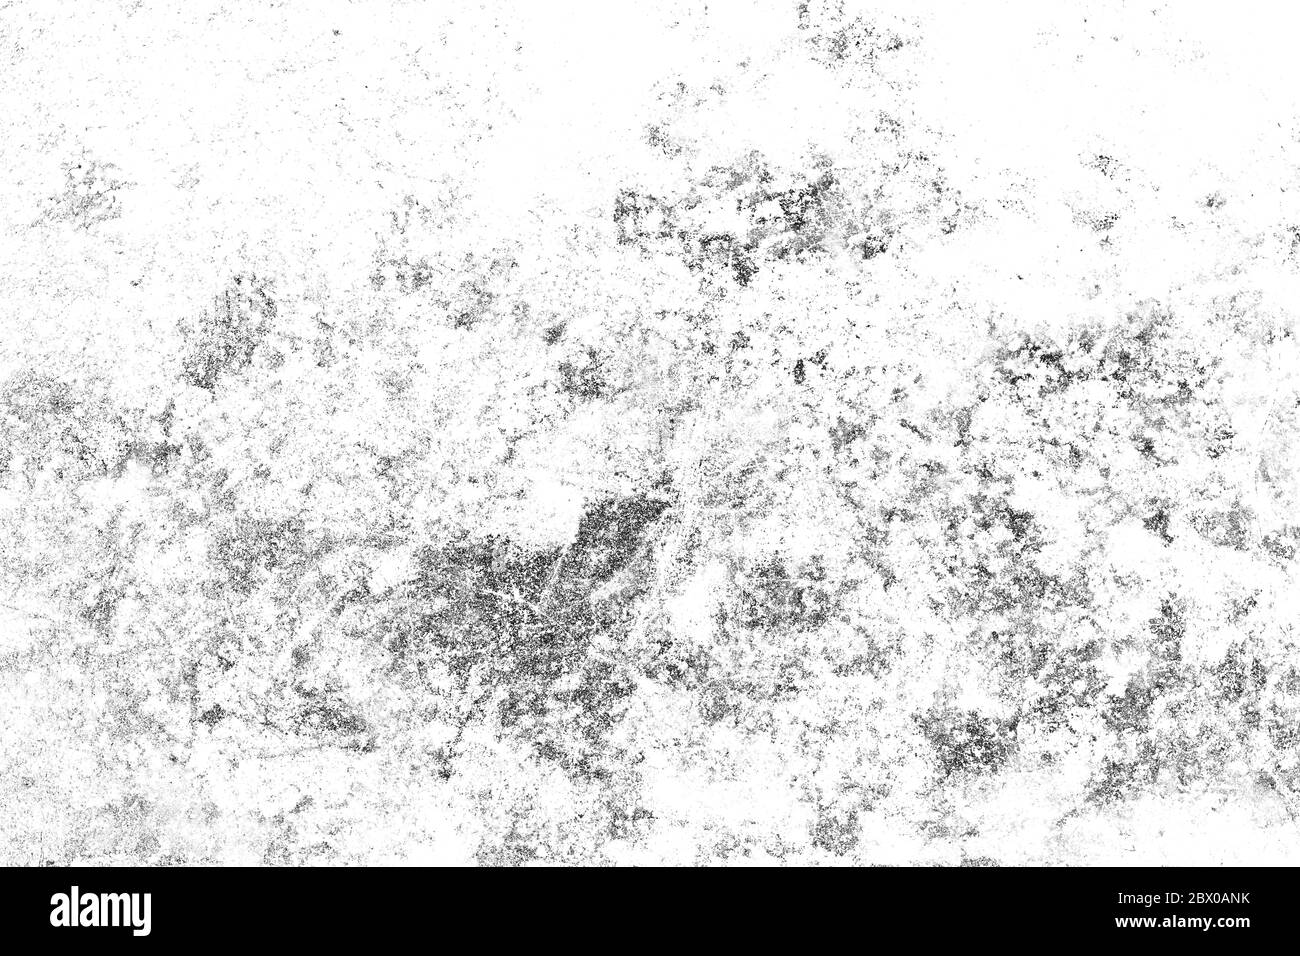 Grunge background of black and white. Abstract monochrome texture. Old vintage surface Stock Photo